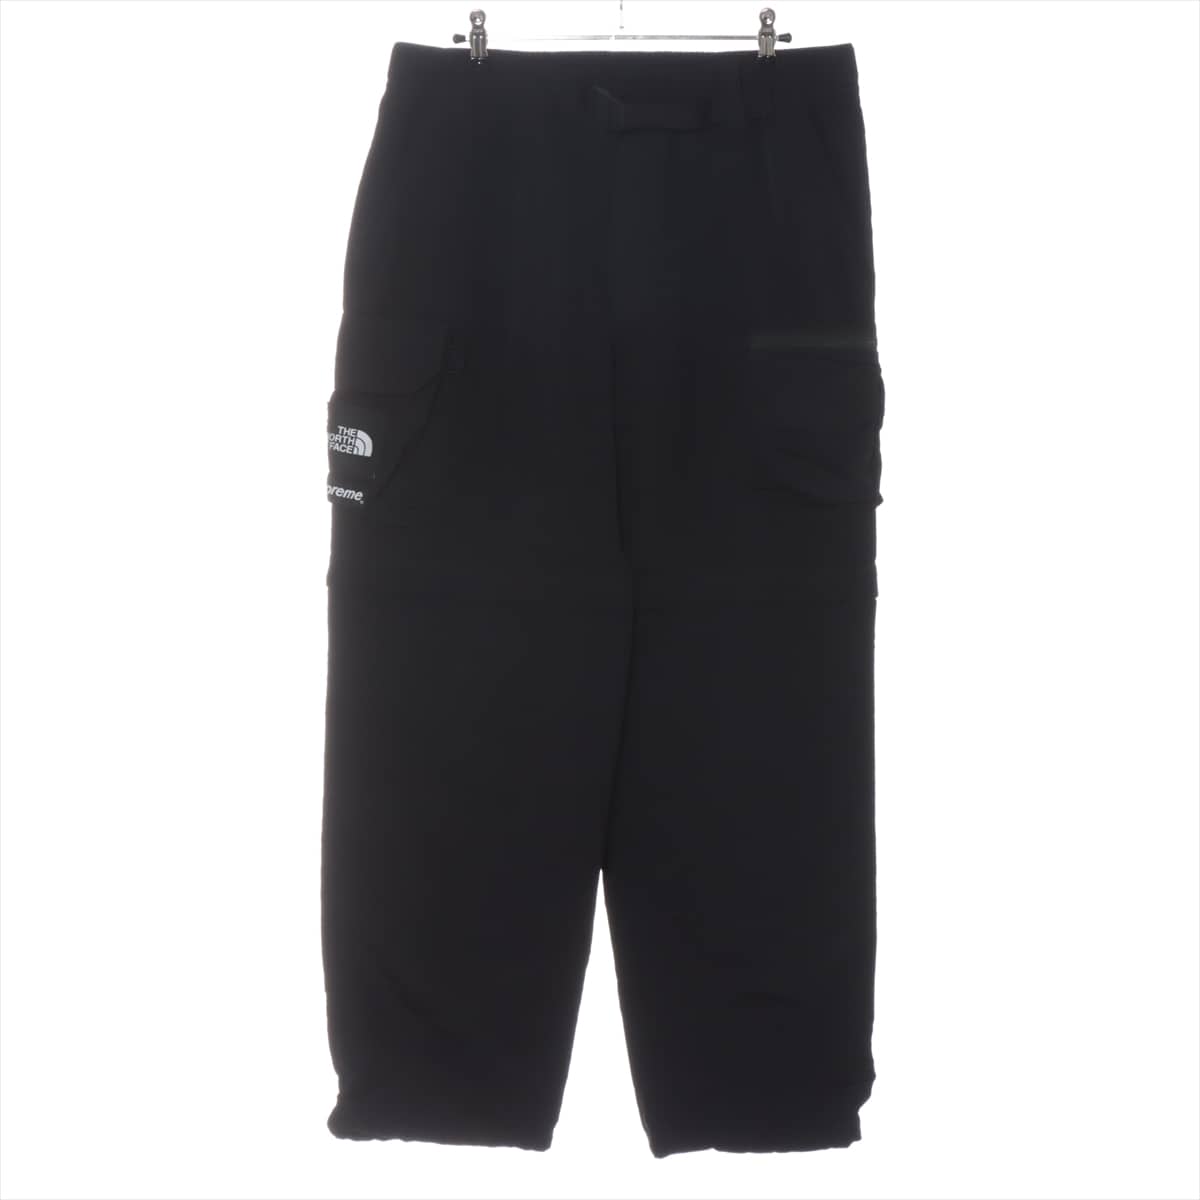 SUPREME × THE NORTH FACE 21SS Polyester & Nylon Cargo pants M Men's Black  Belted Cargo Pant